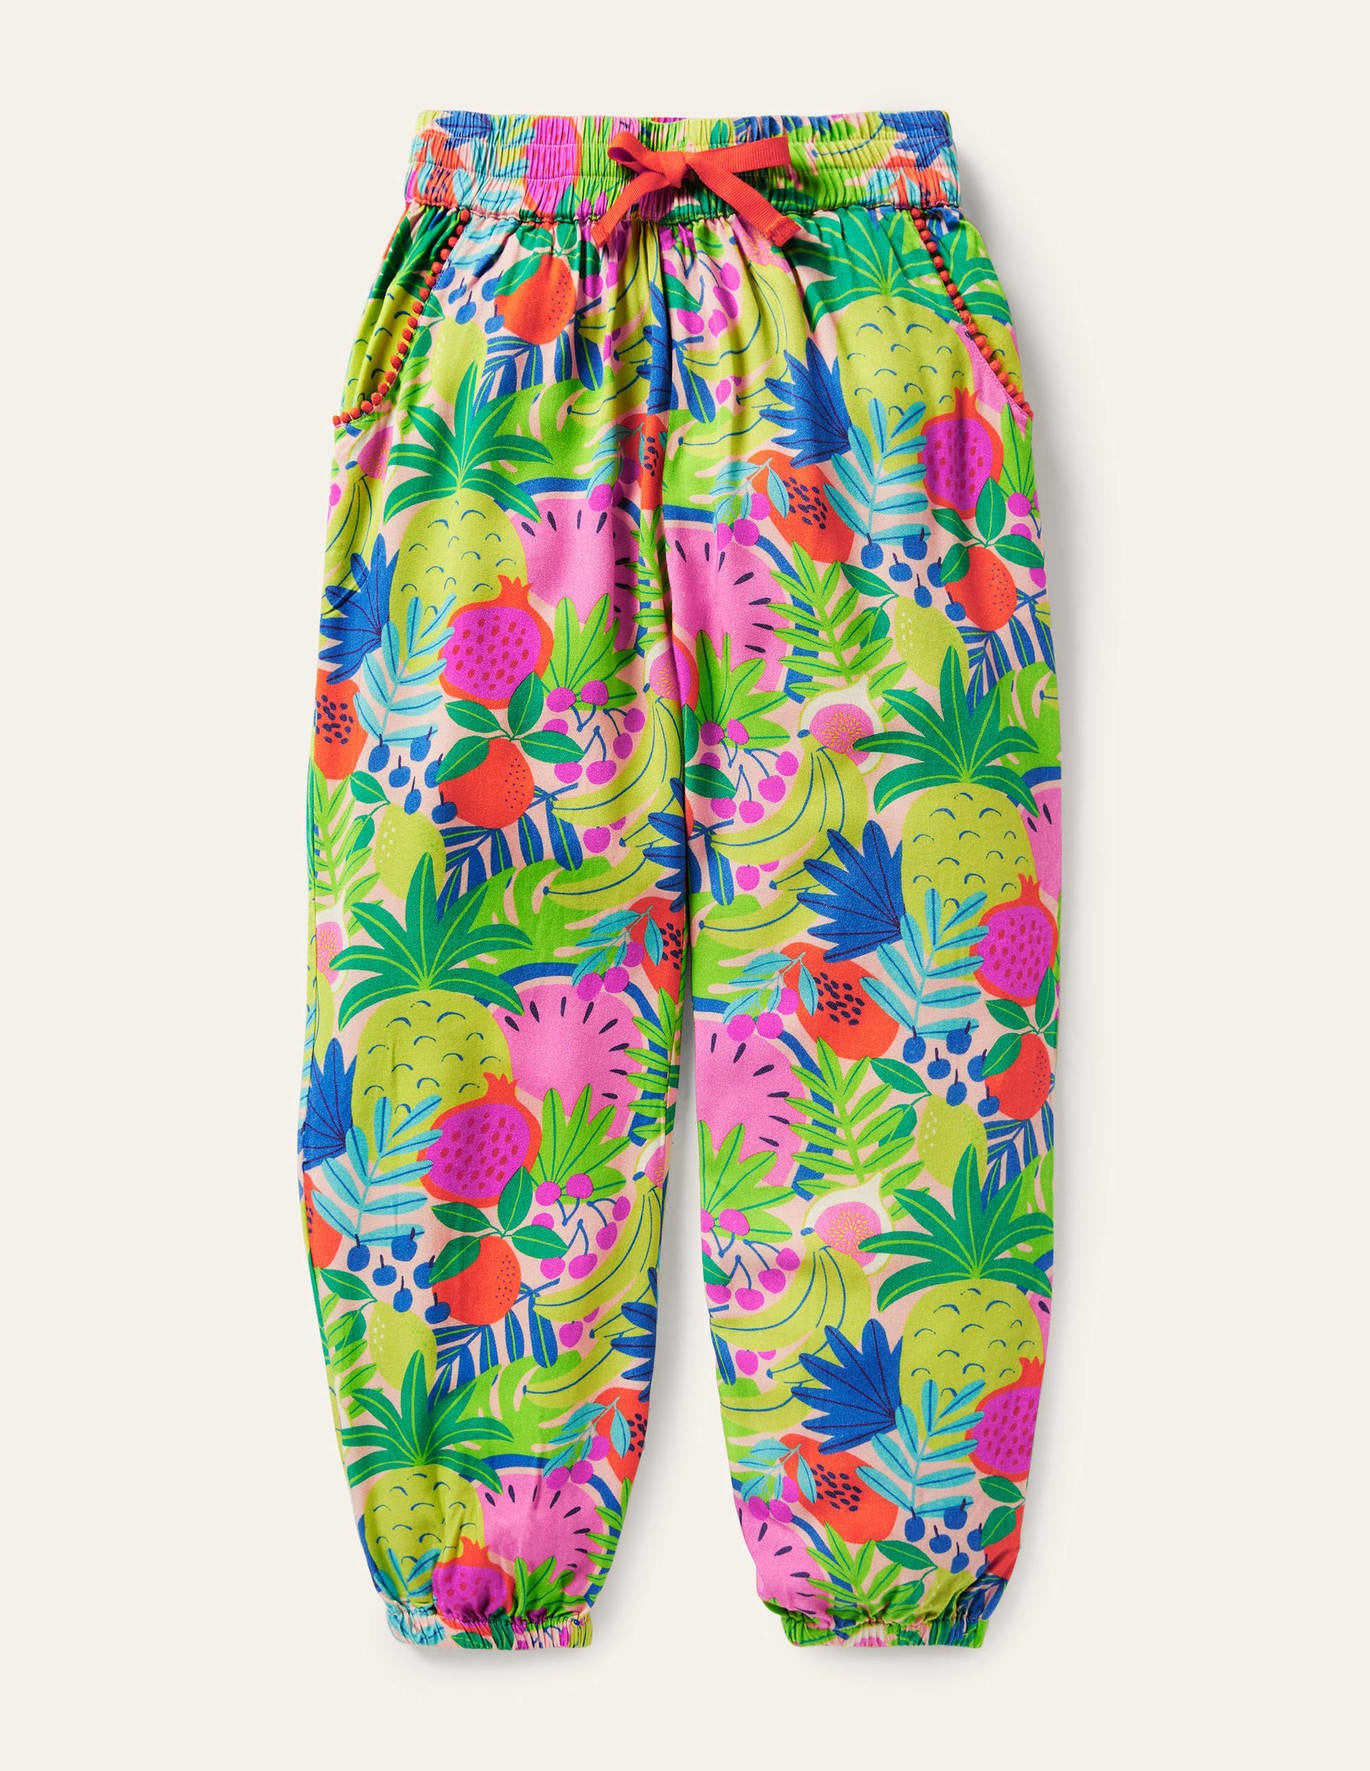 Boden Relaxed Woven Printed Pants - Multi Tropical Fruit